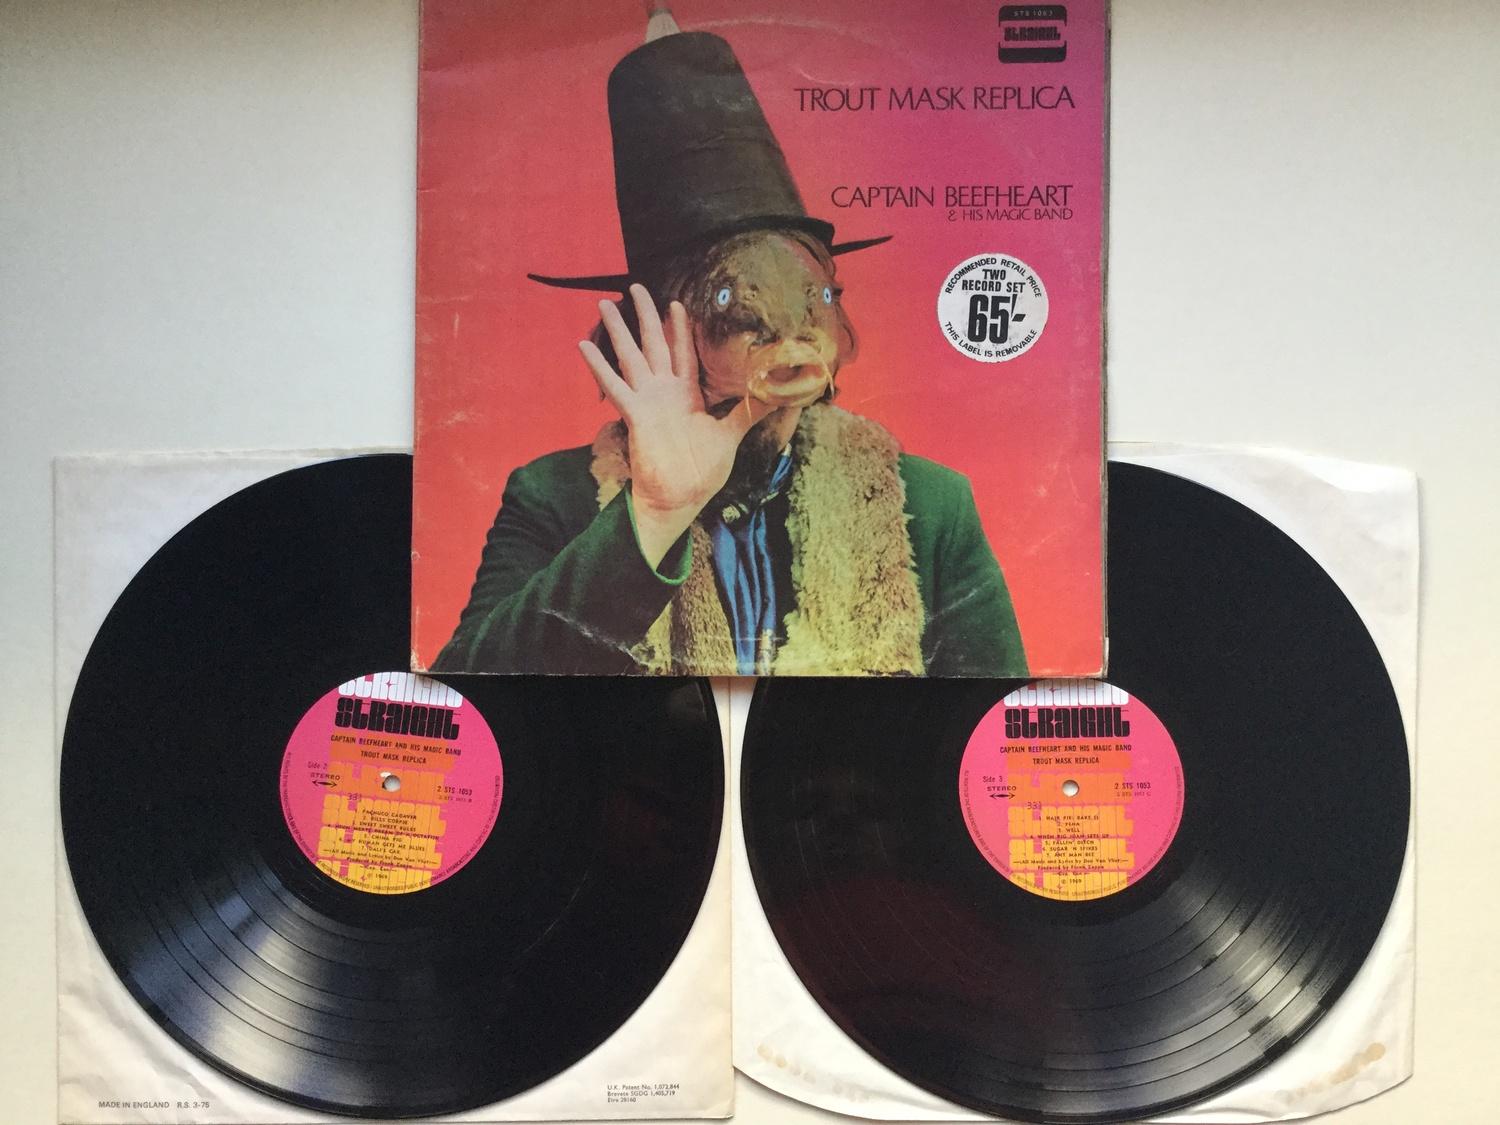 CAPTAIN BEEFHEART - TROUT MASK REPLICA LP RECORD. Dbl album here on a 1st Pressing Straight STS 1053